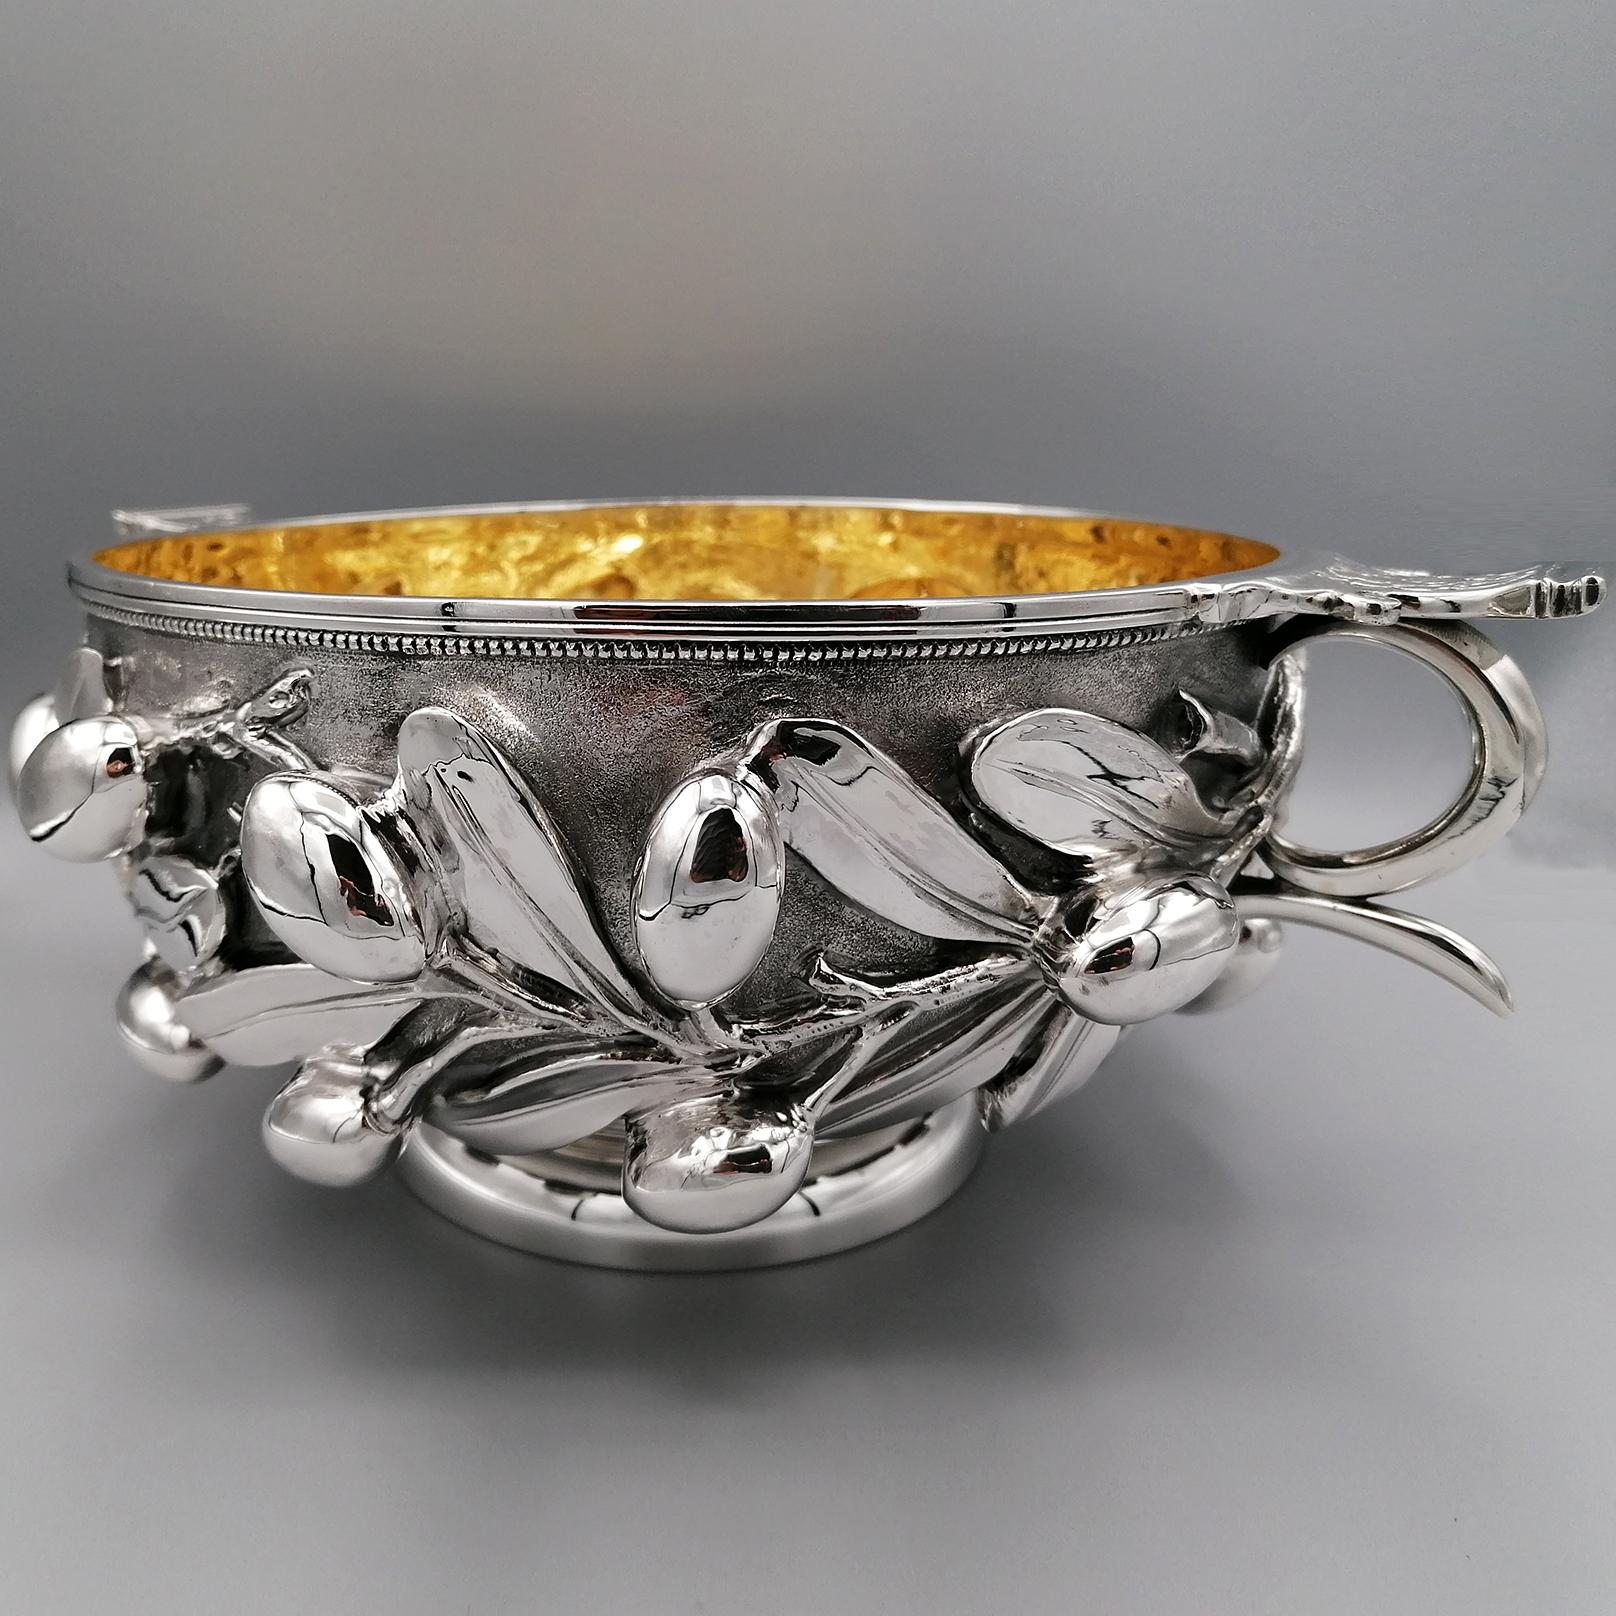 20th Century Italian Sterling Silver Bowl with Handles, Roman Replica For Sale 5